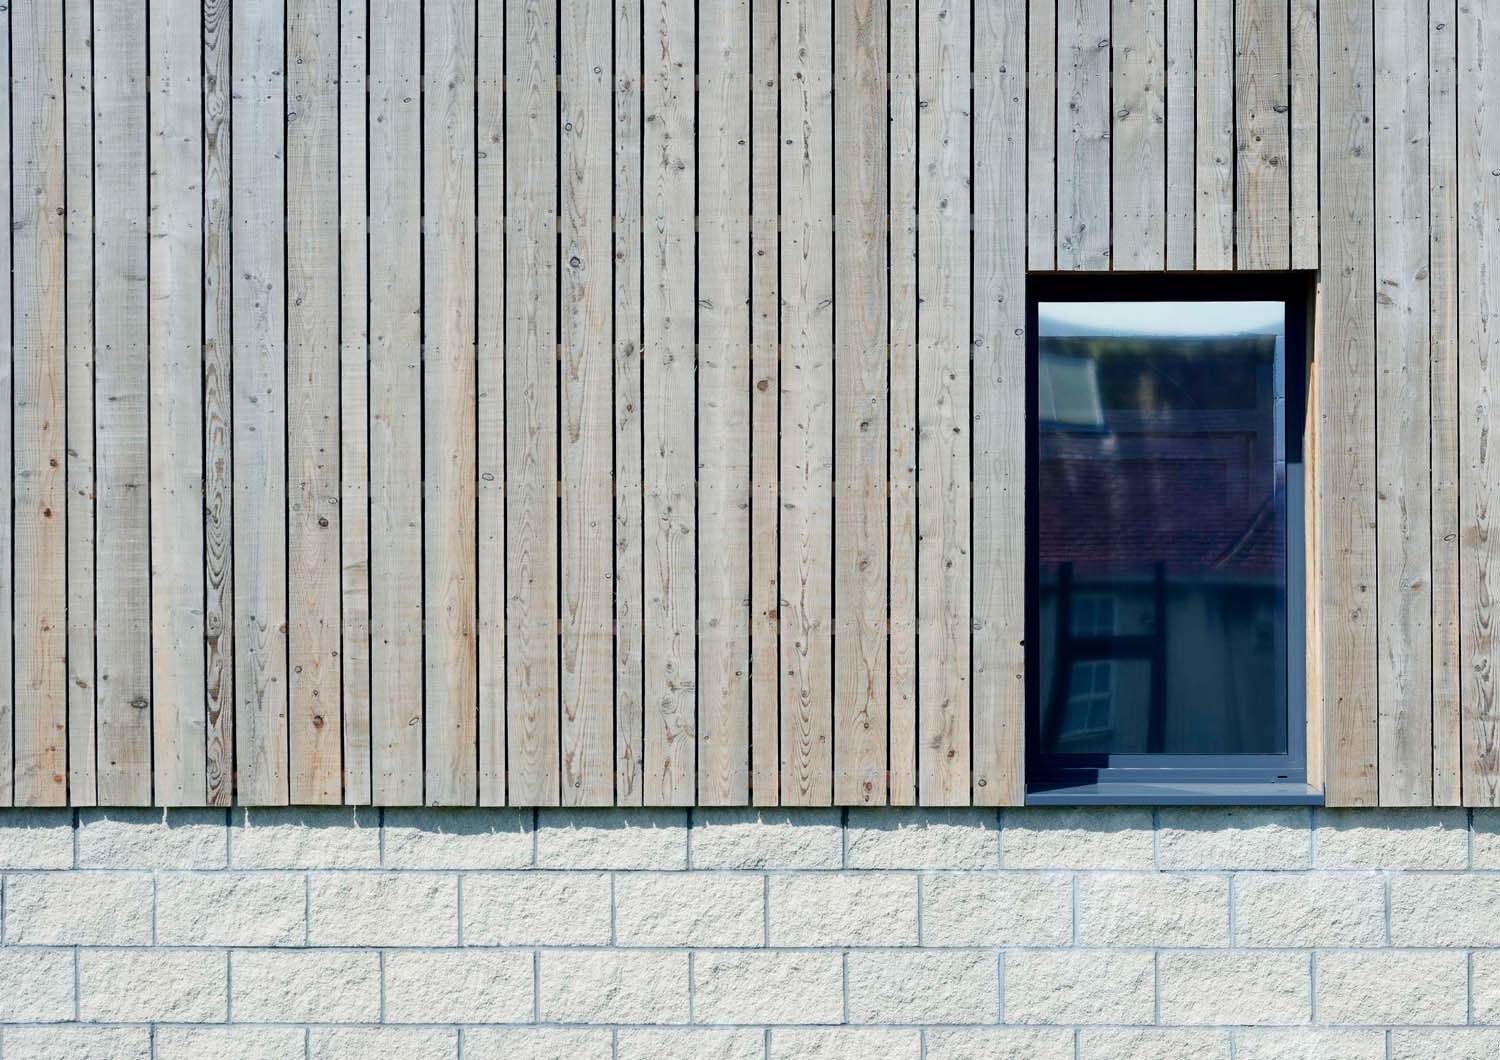 A close up of an exterior wall. There is timber cladding sitting on top of a sandstone base, and a window with a dark frame on the right.